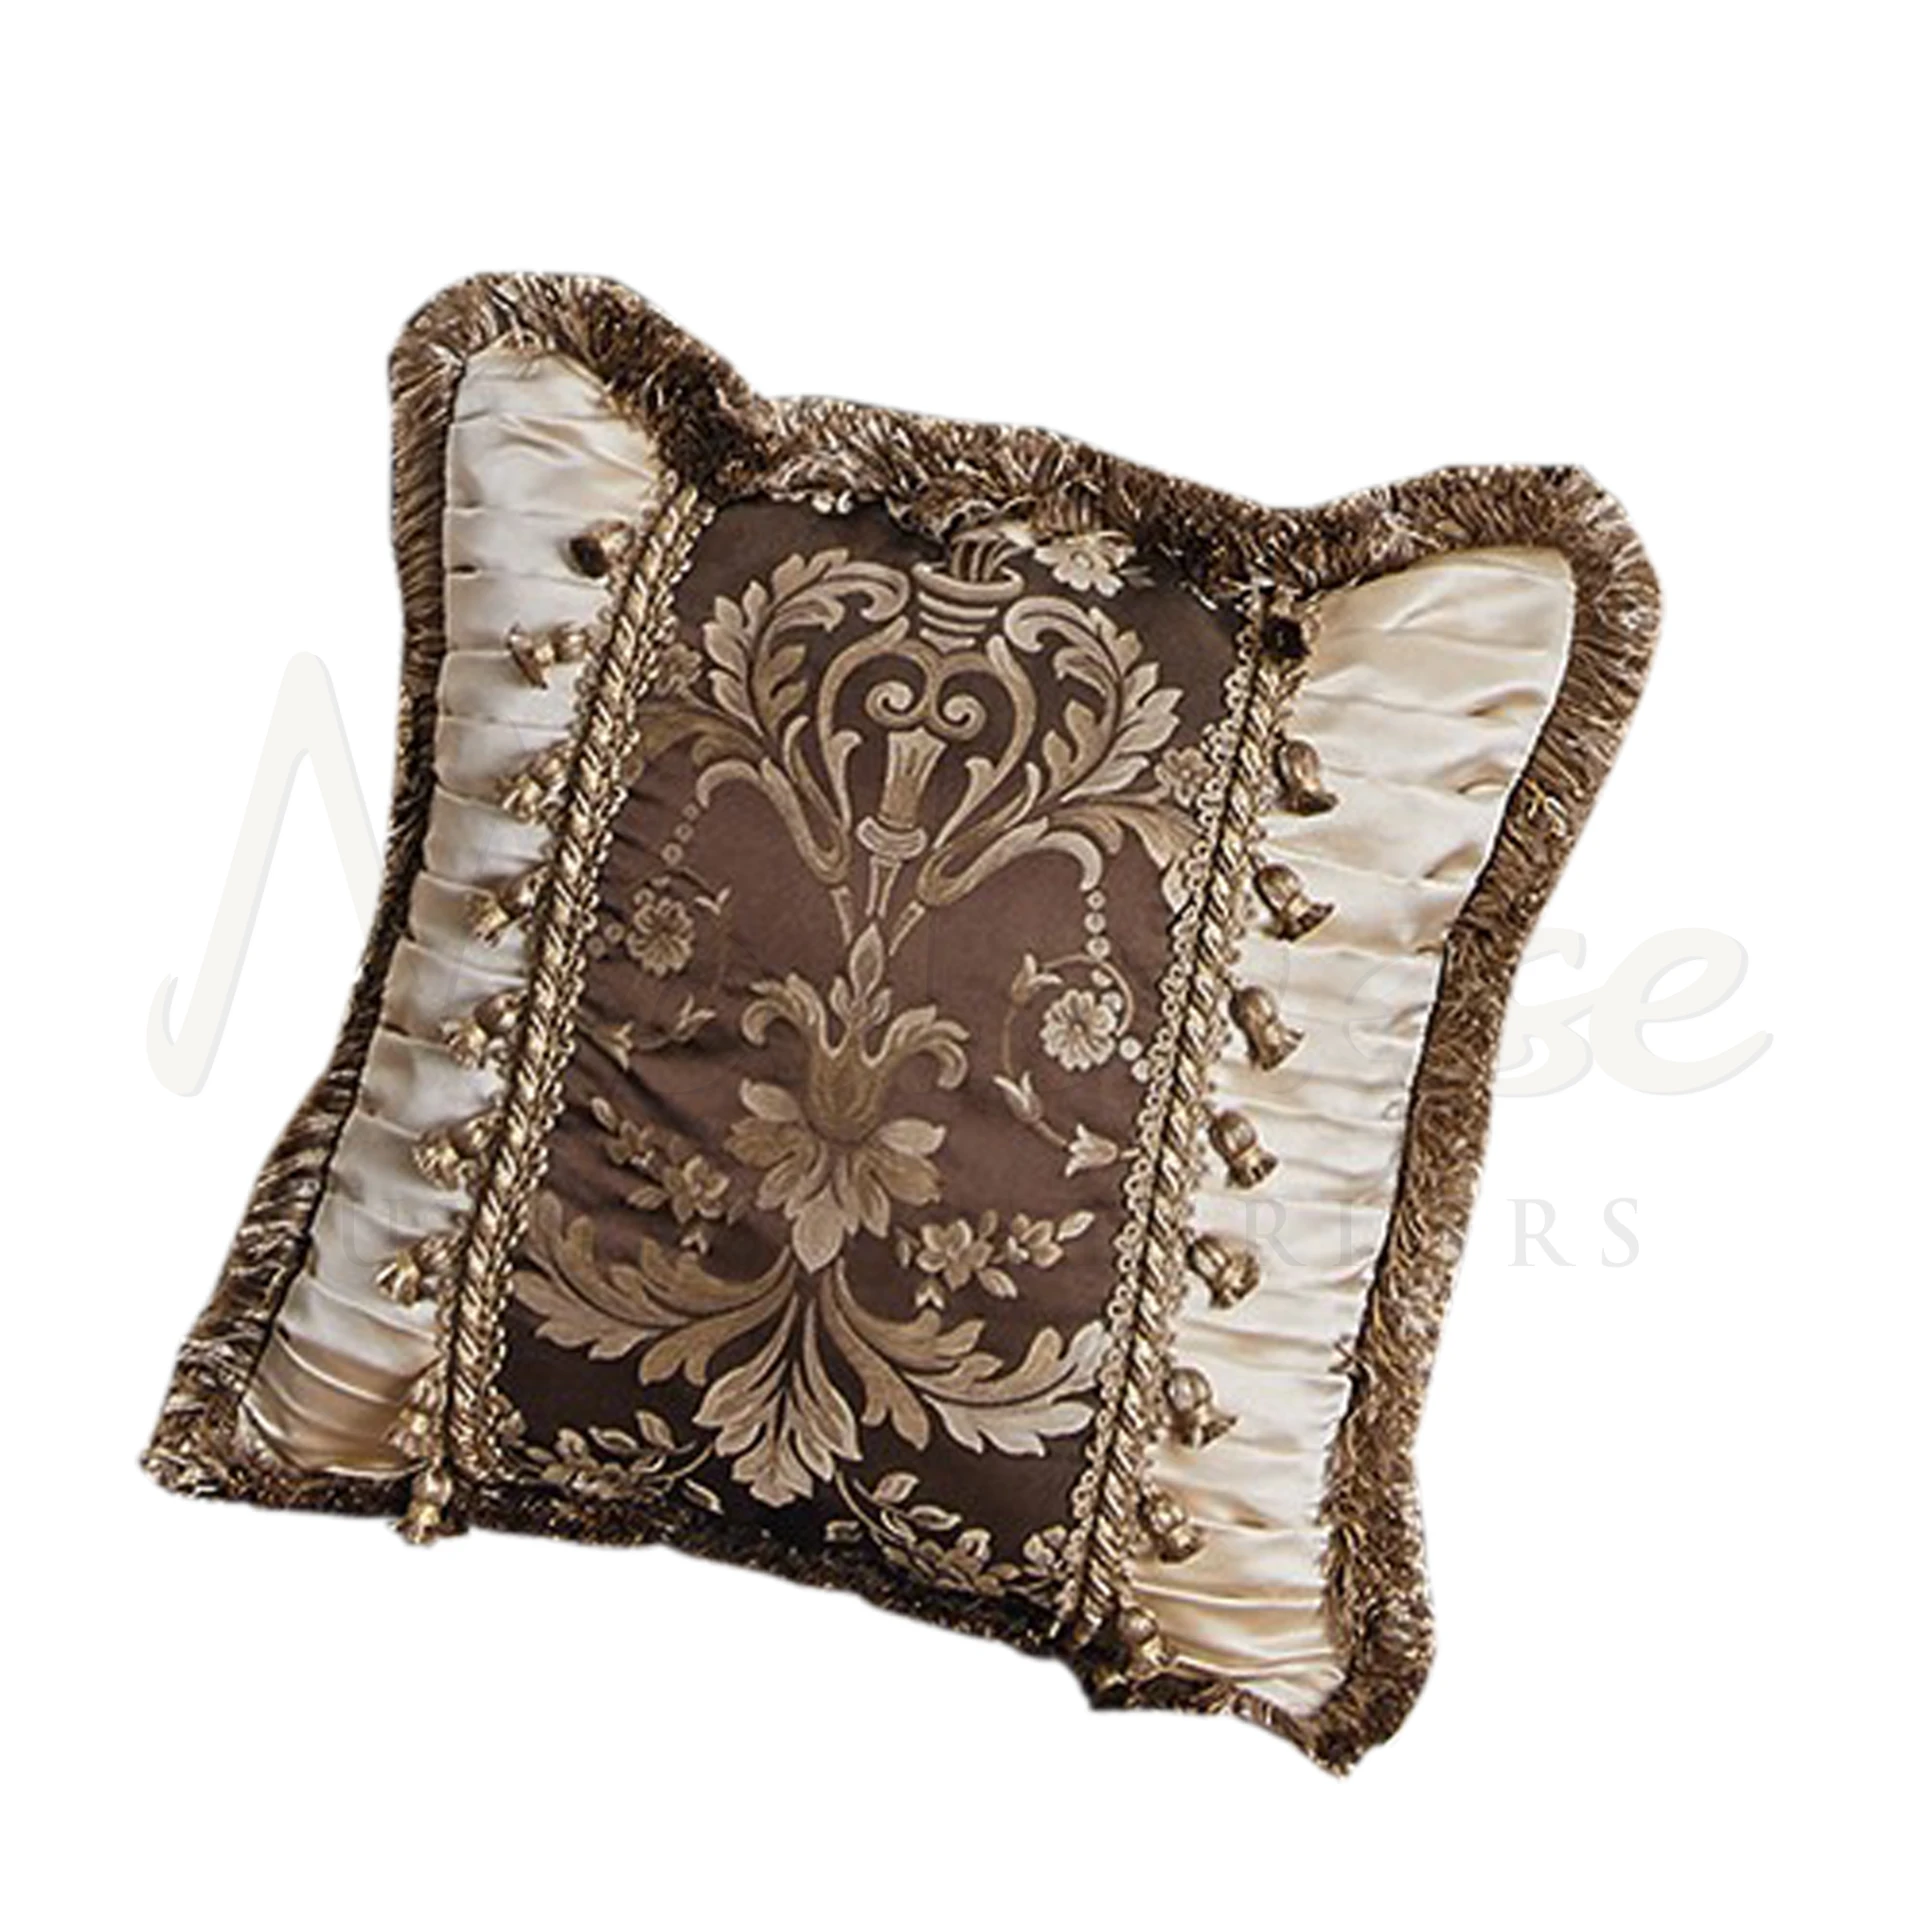 Prestige Pillow luxurious Italian-made cushion, offering supreme comfort and high-quality textiles for peaceful sleep.